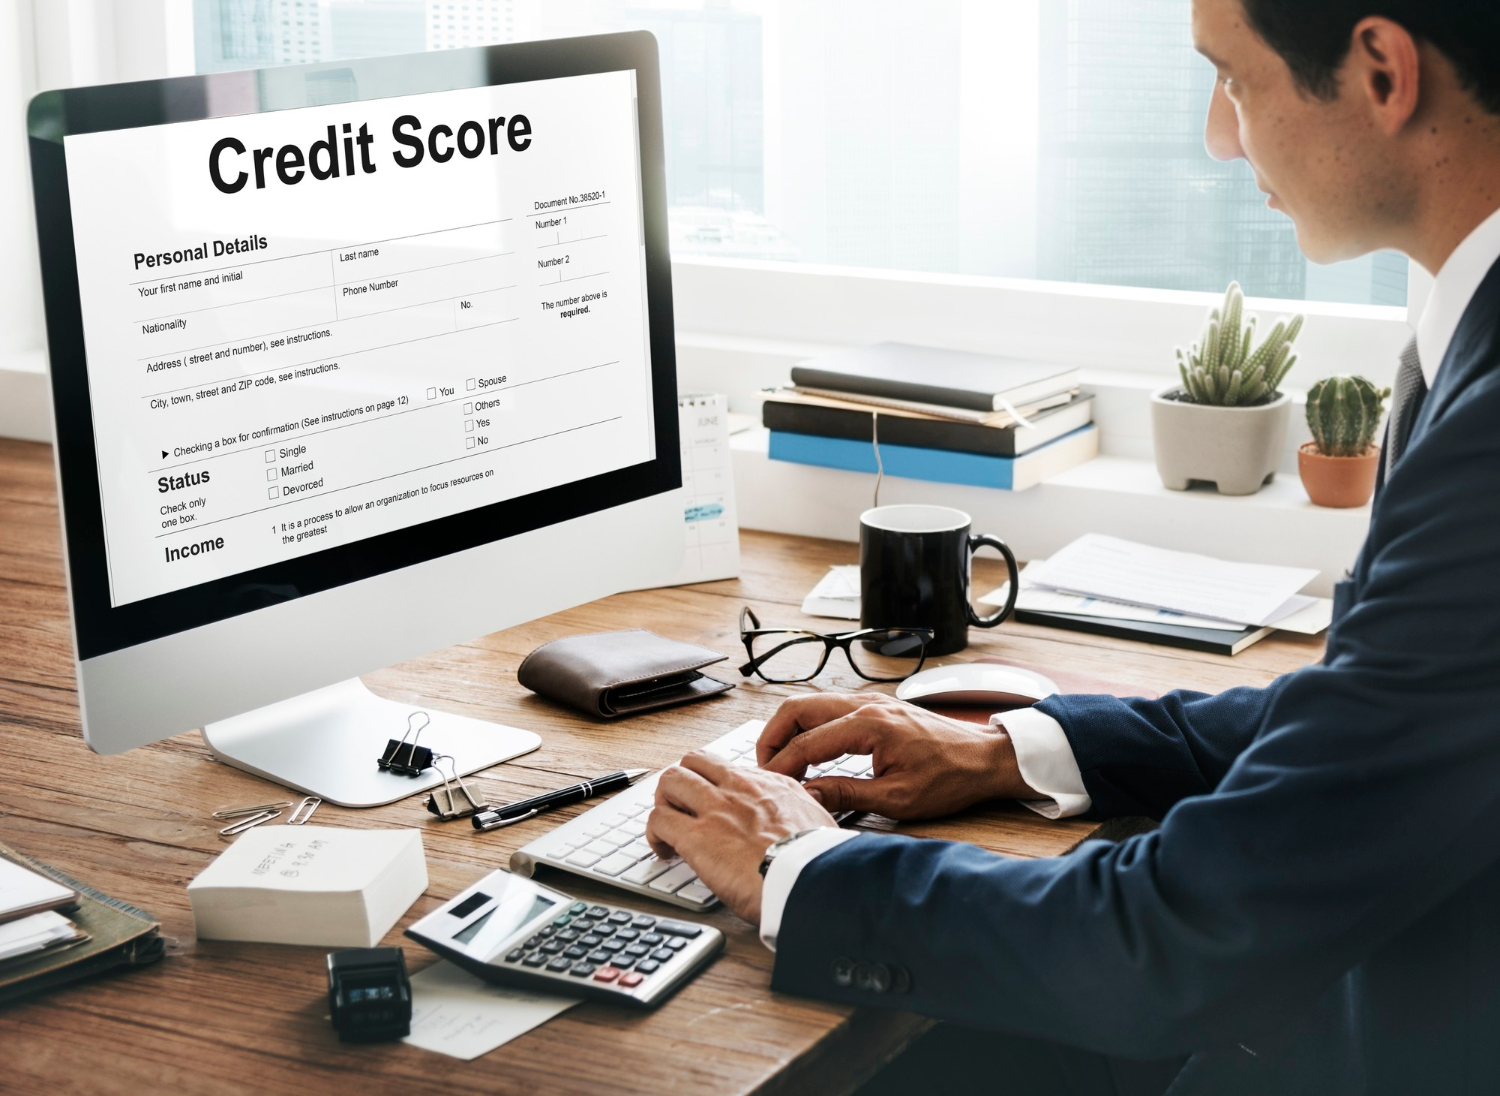 Credit Scoring in the AI Age: How Machine Learning is Changing Lending Practices